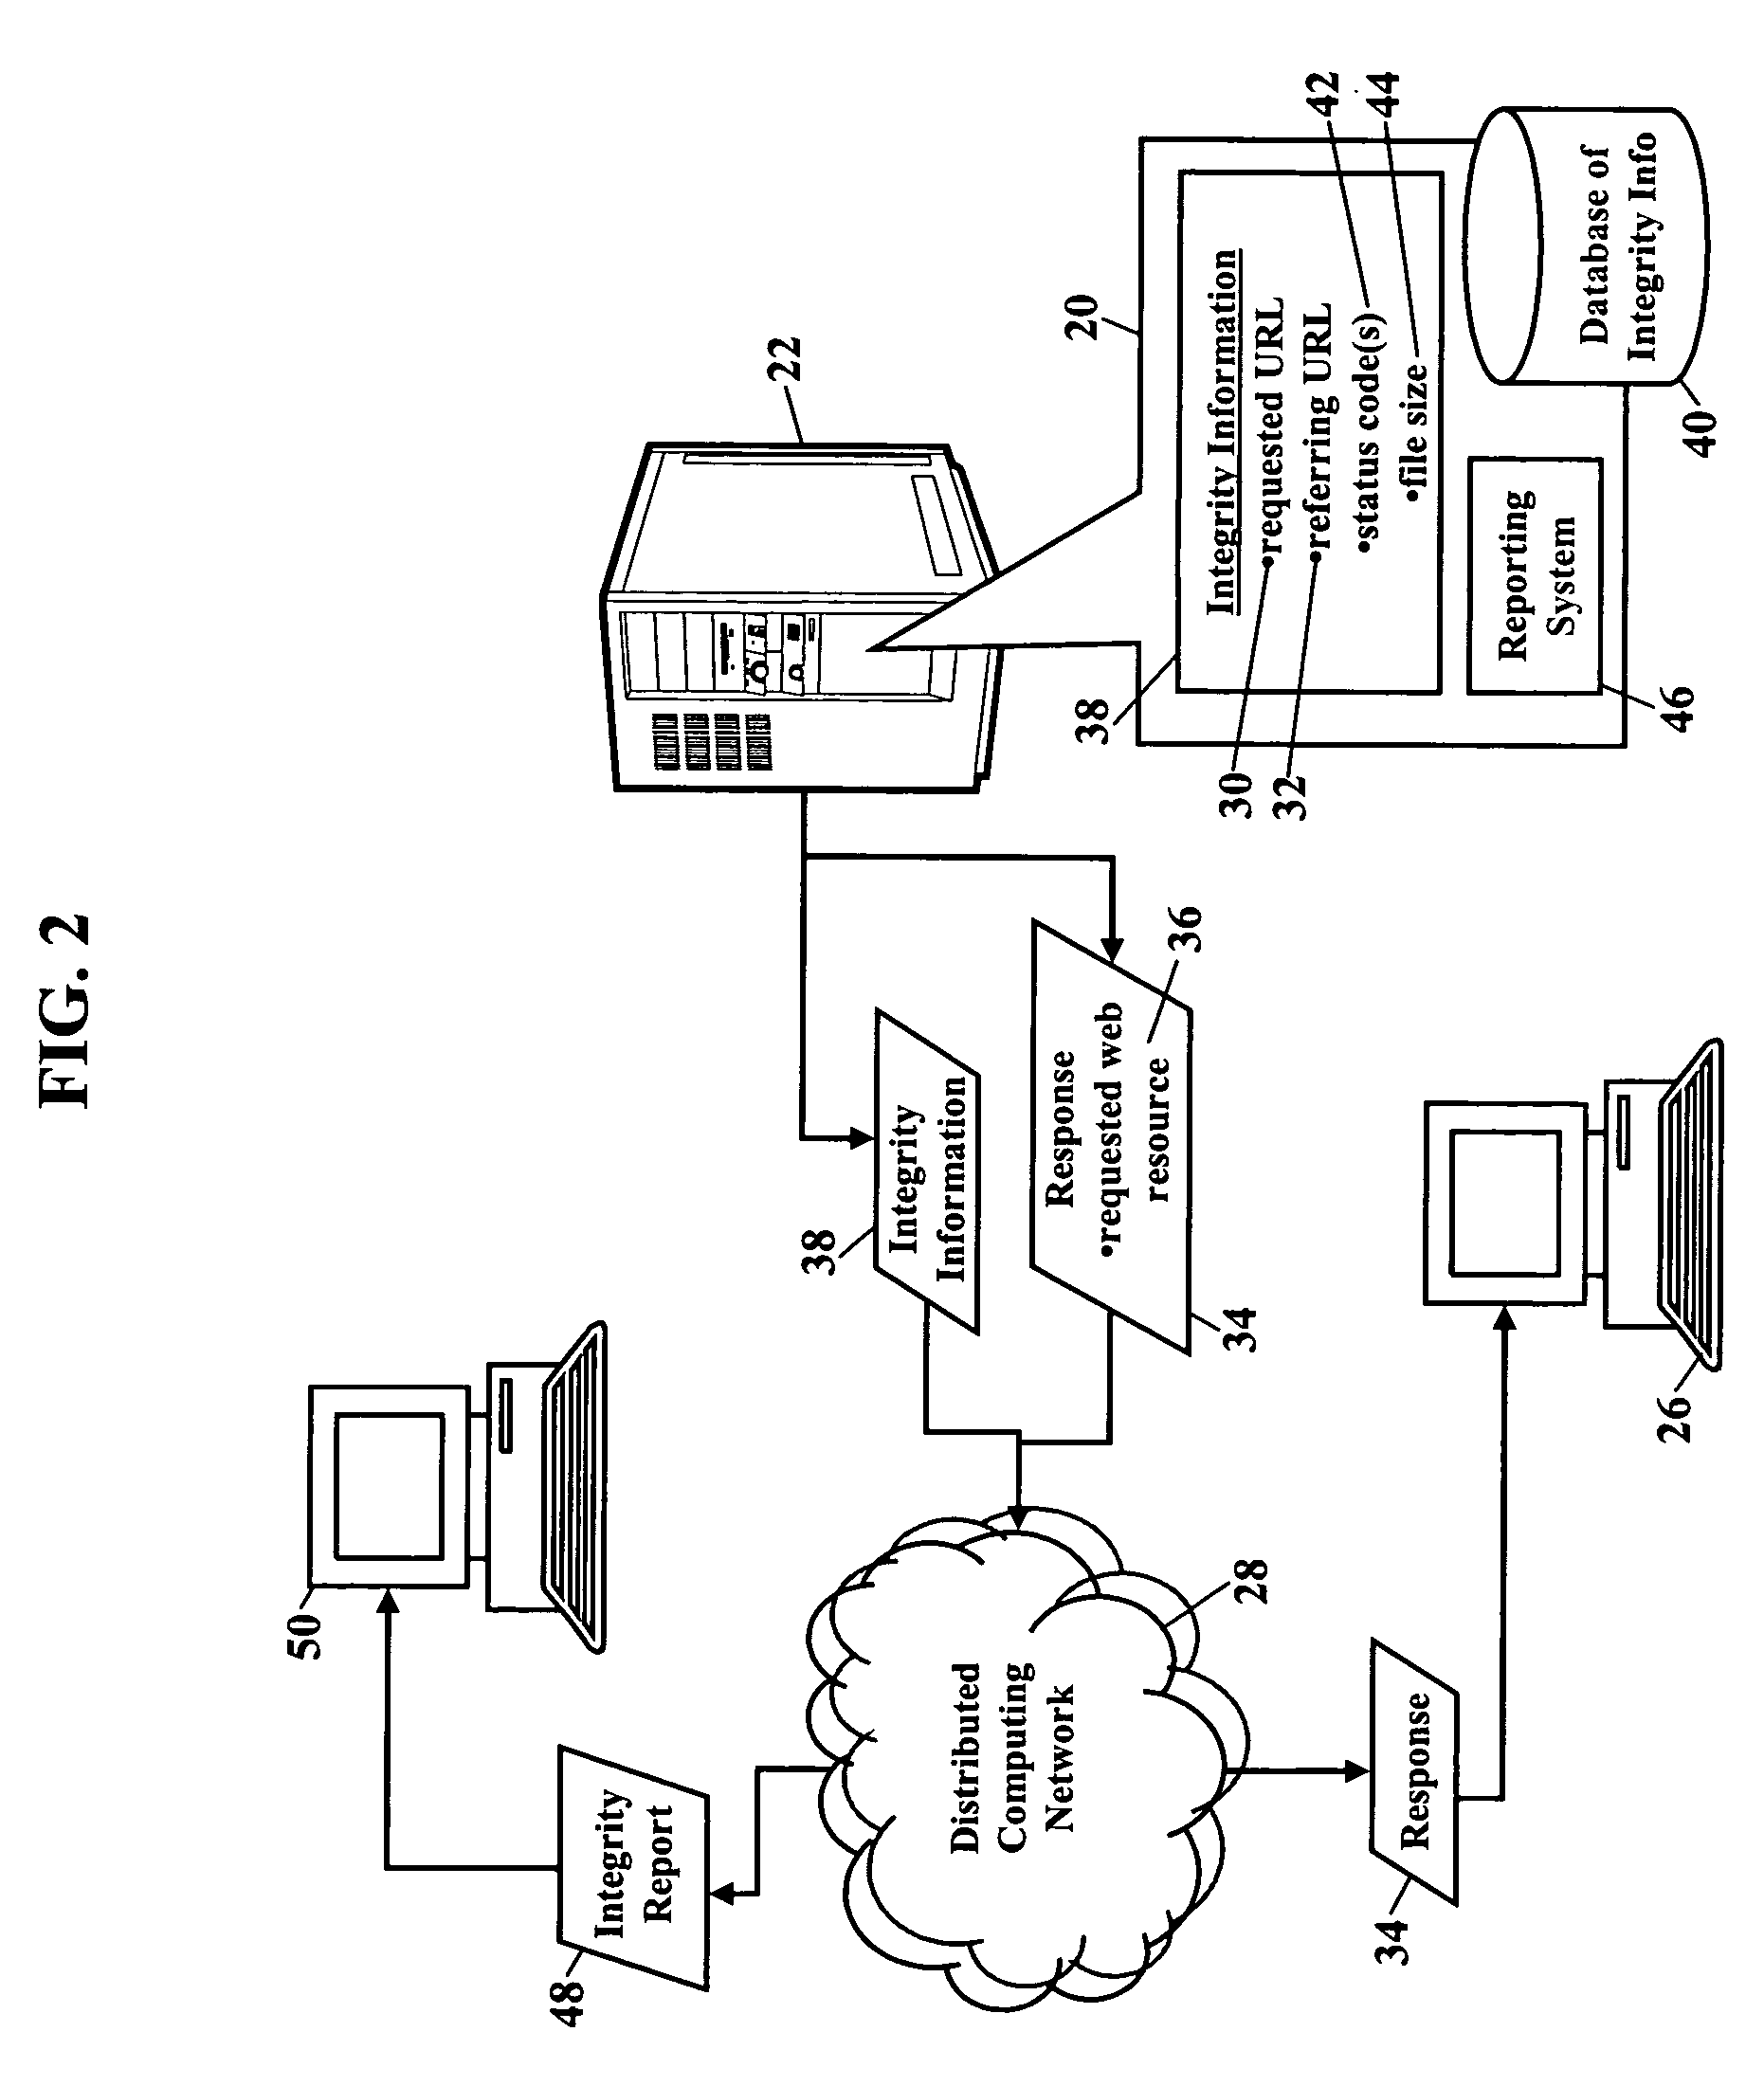 Methods, systems, and products for verifying integrity of web-server served content